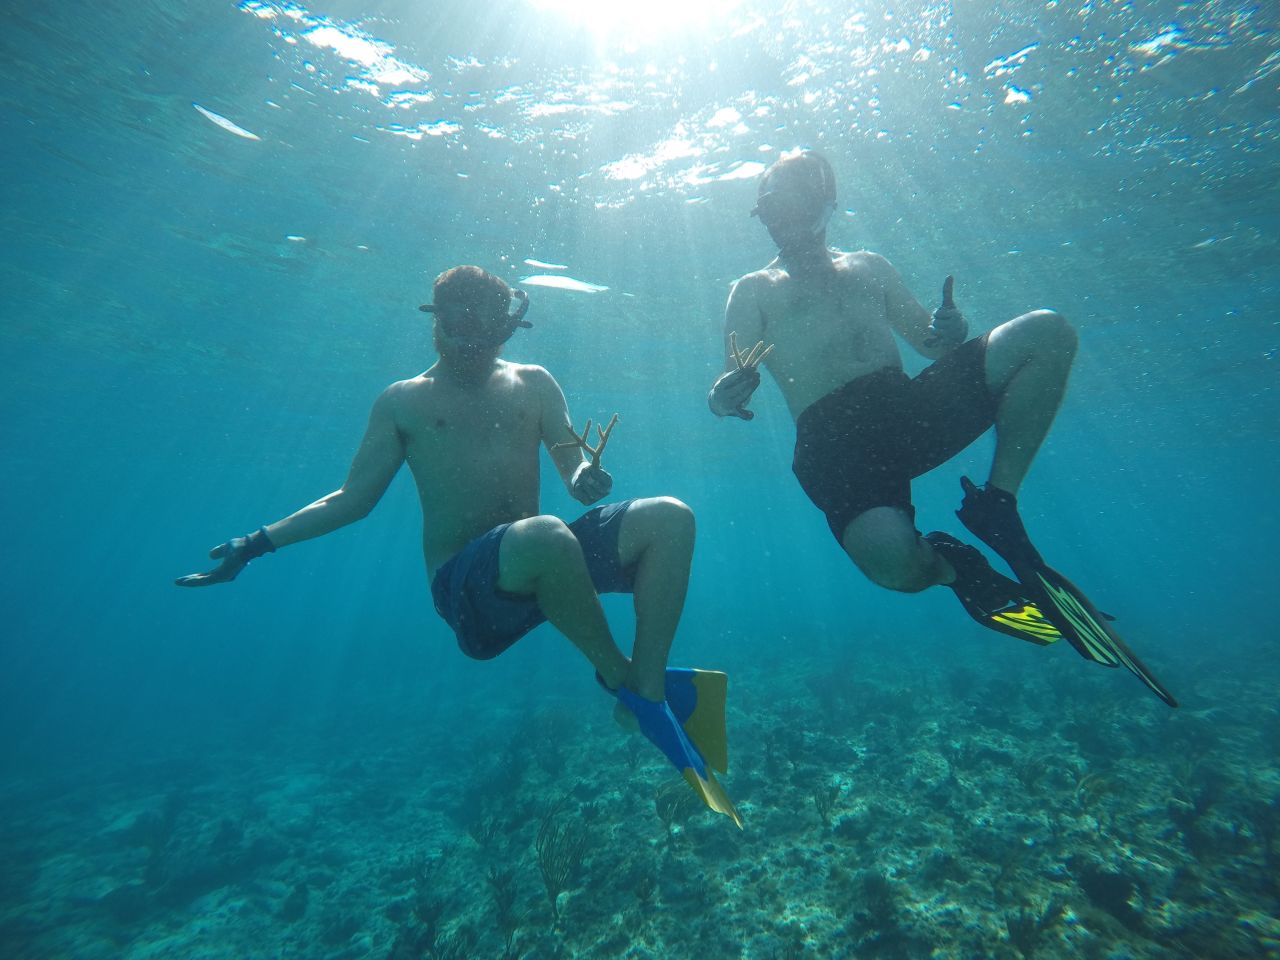 Sam Teicher and Gator Halpern, Coral Vita's founders, hope to help reefs worldwide adapt to the impacts of climate change. 